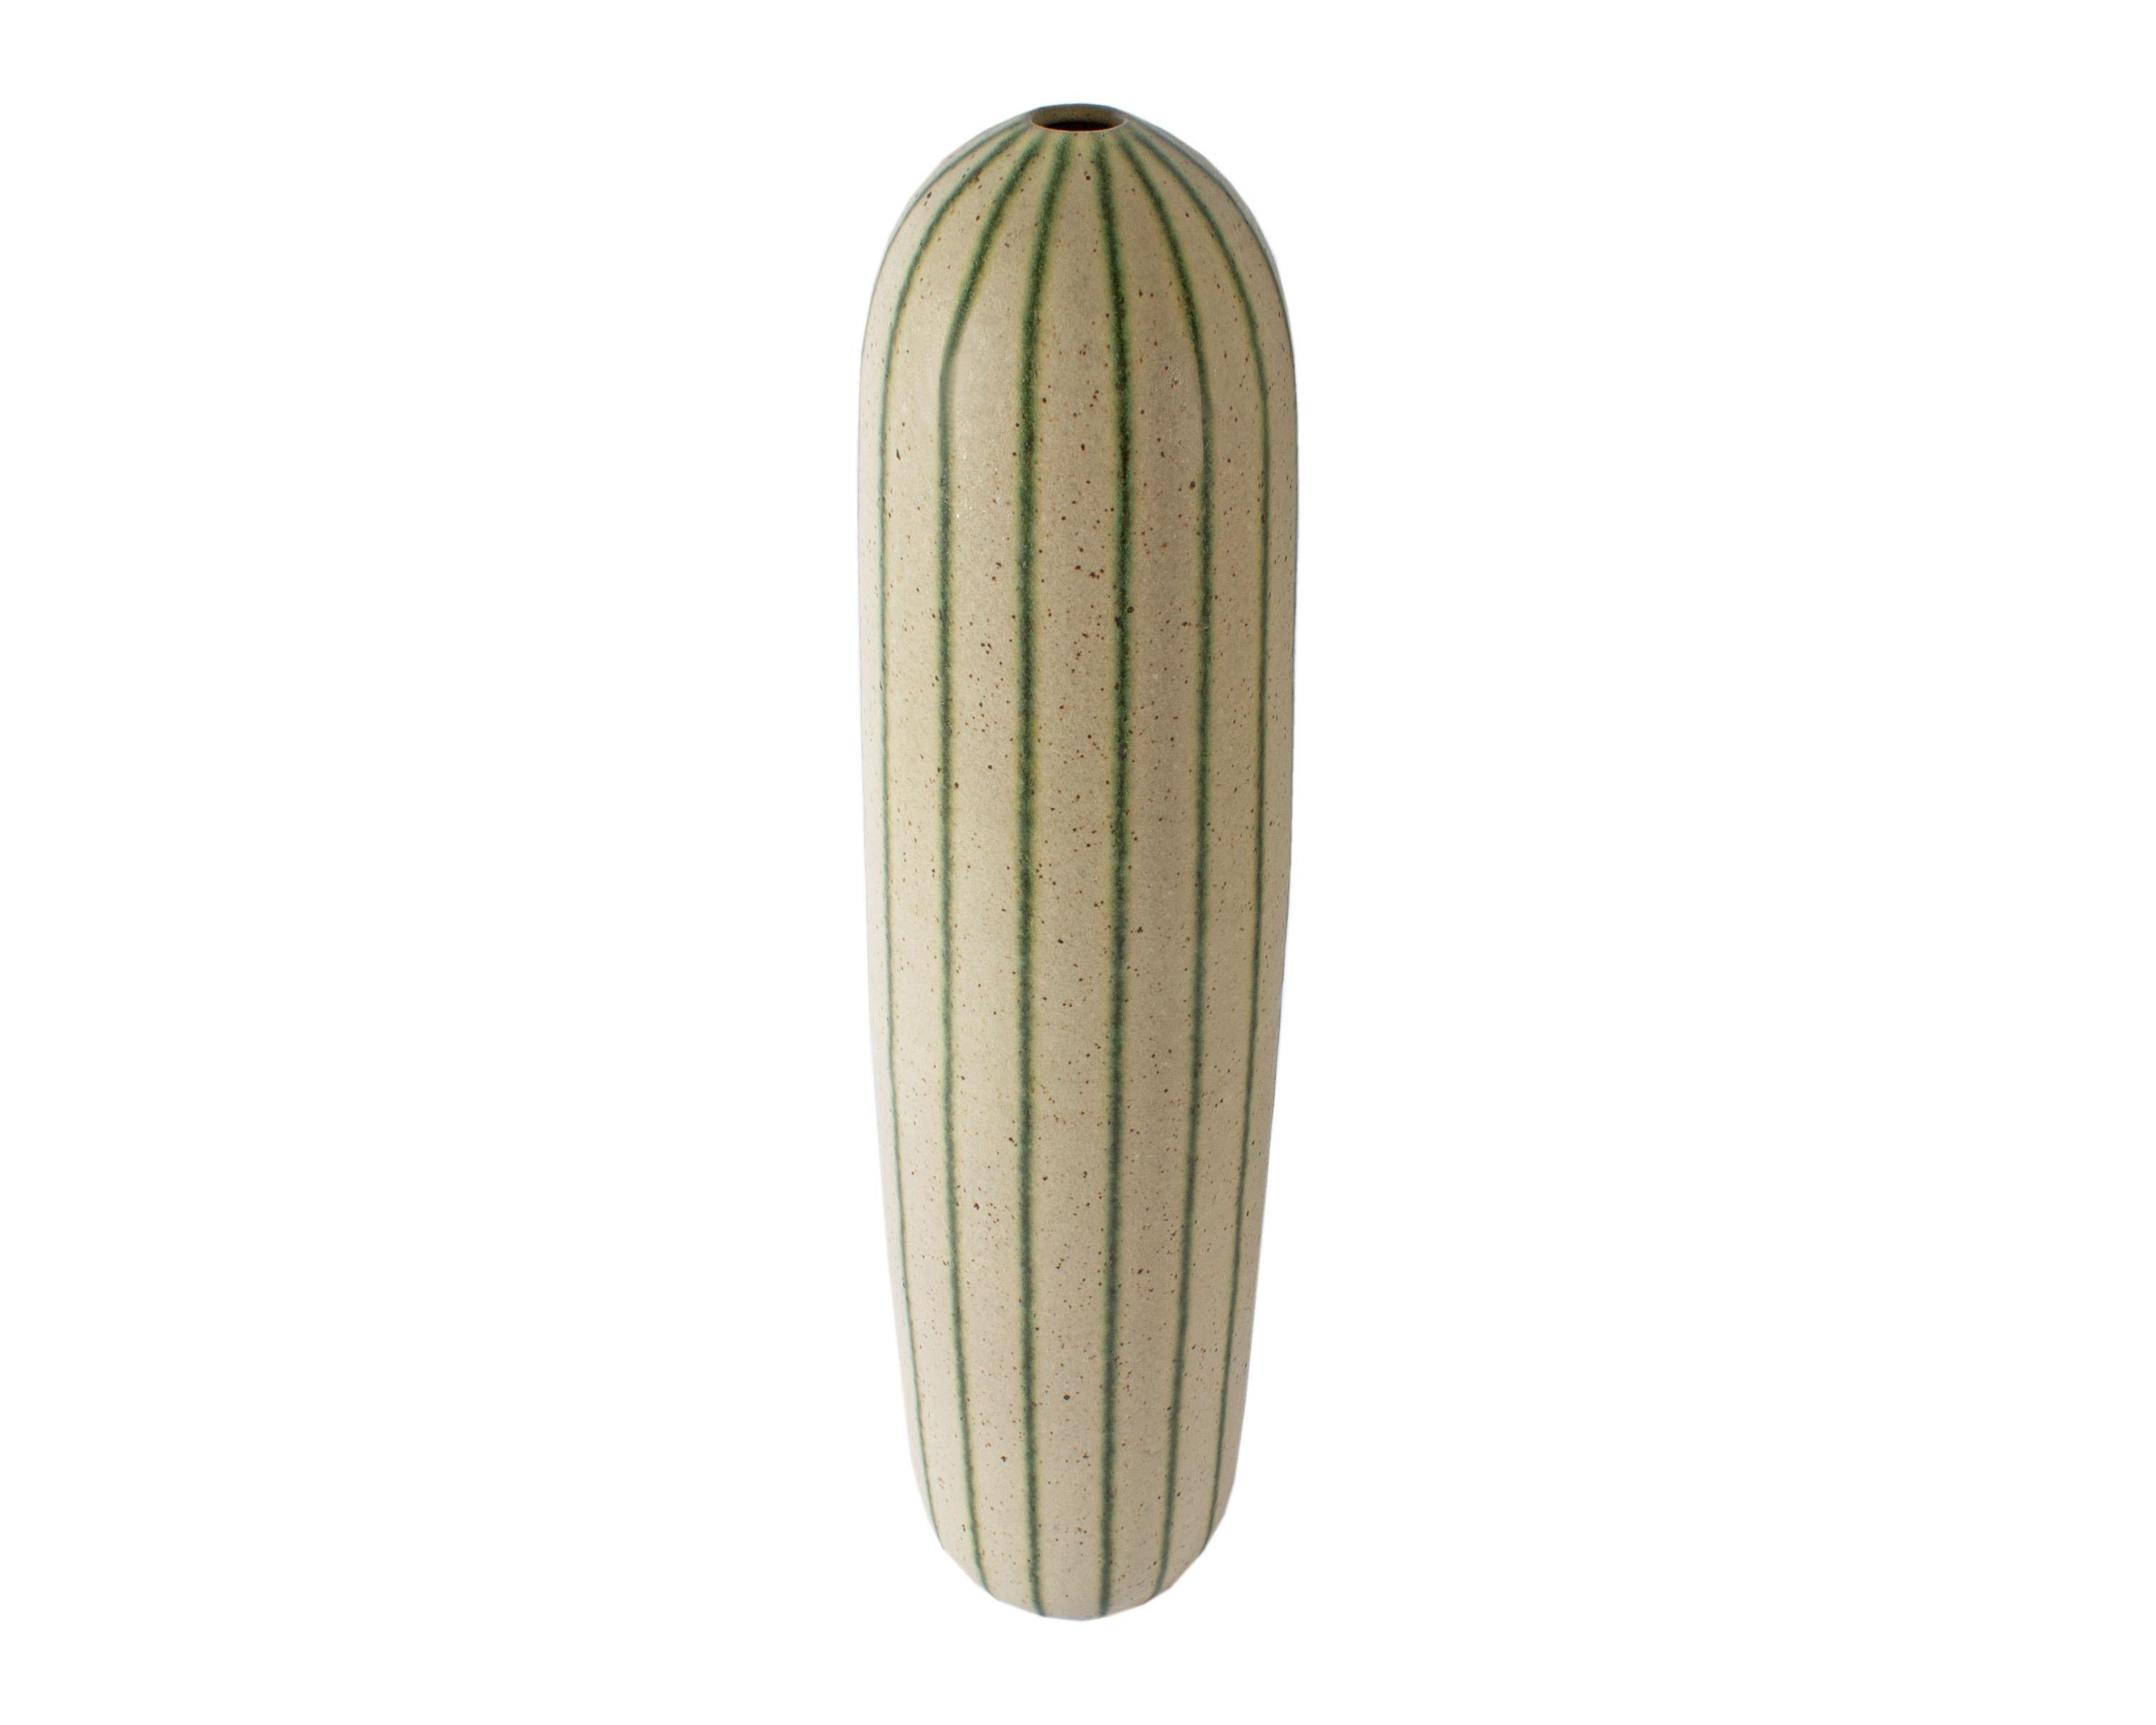 A studio pottery vase by American artist Richard Tuck (1948-2013). Signed to the underside, the oversized vase features a tall slender body. Green vertical stripes run the length of the vase over the creme speckled glaze. Signed “R. Tuck” to the